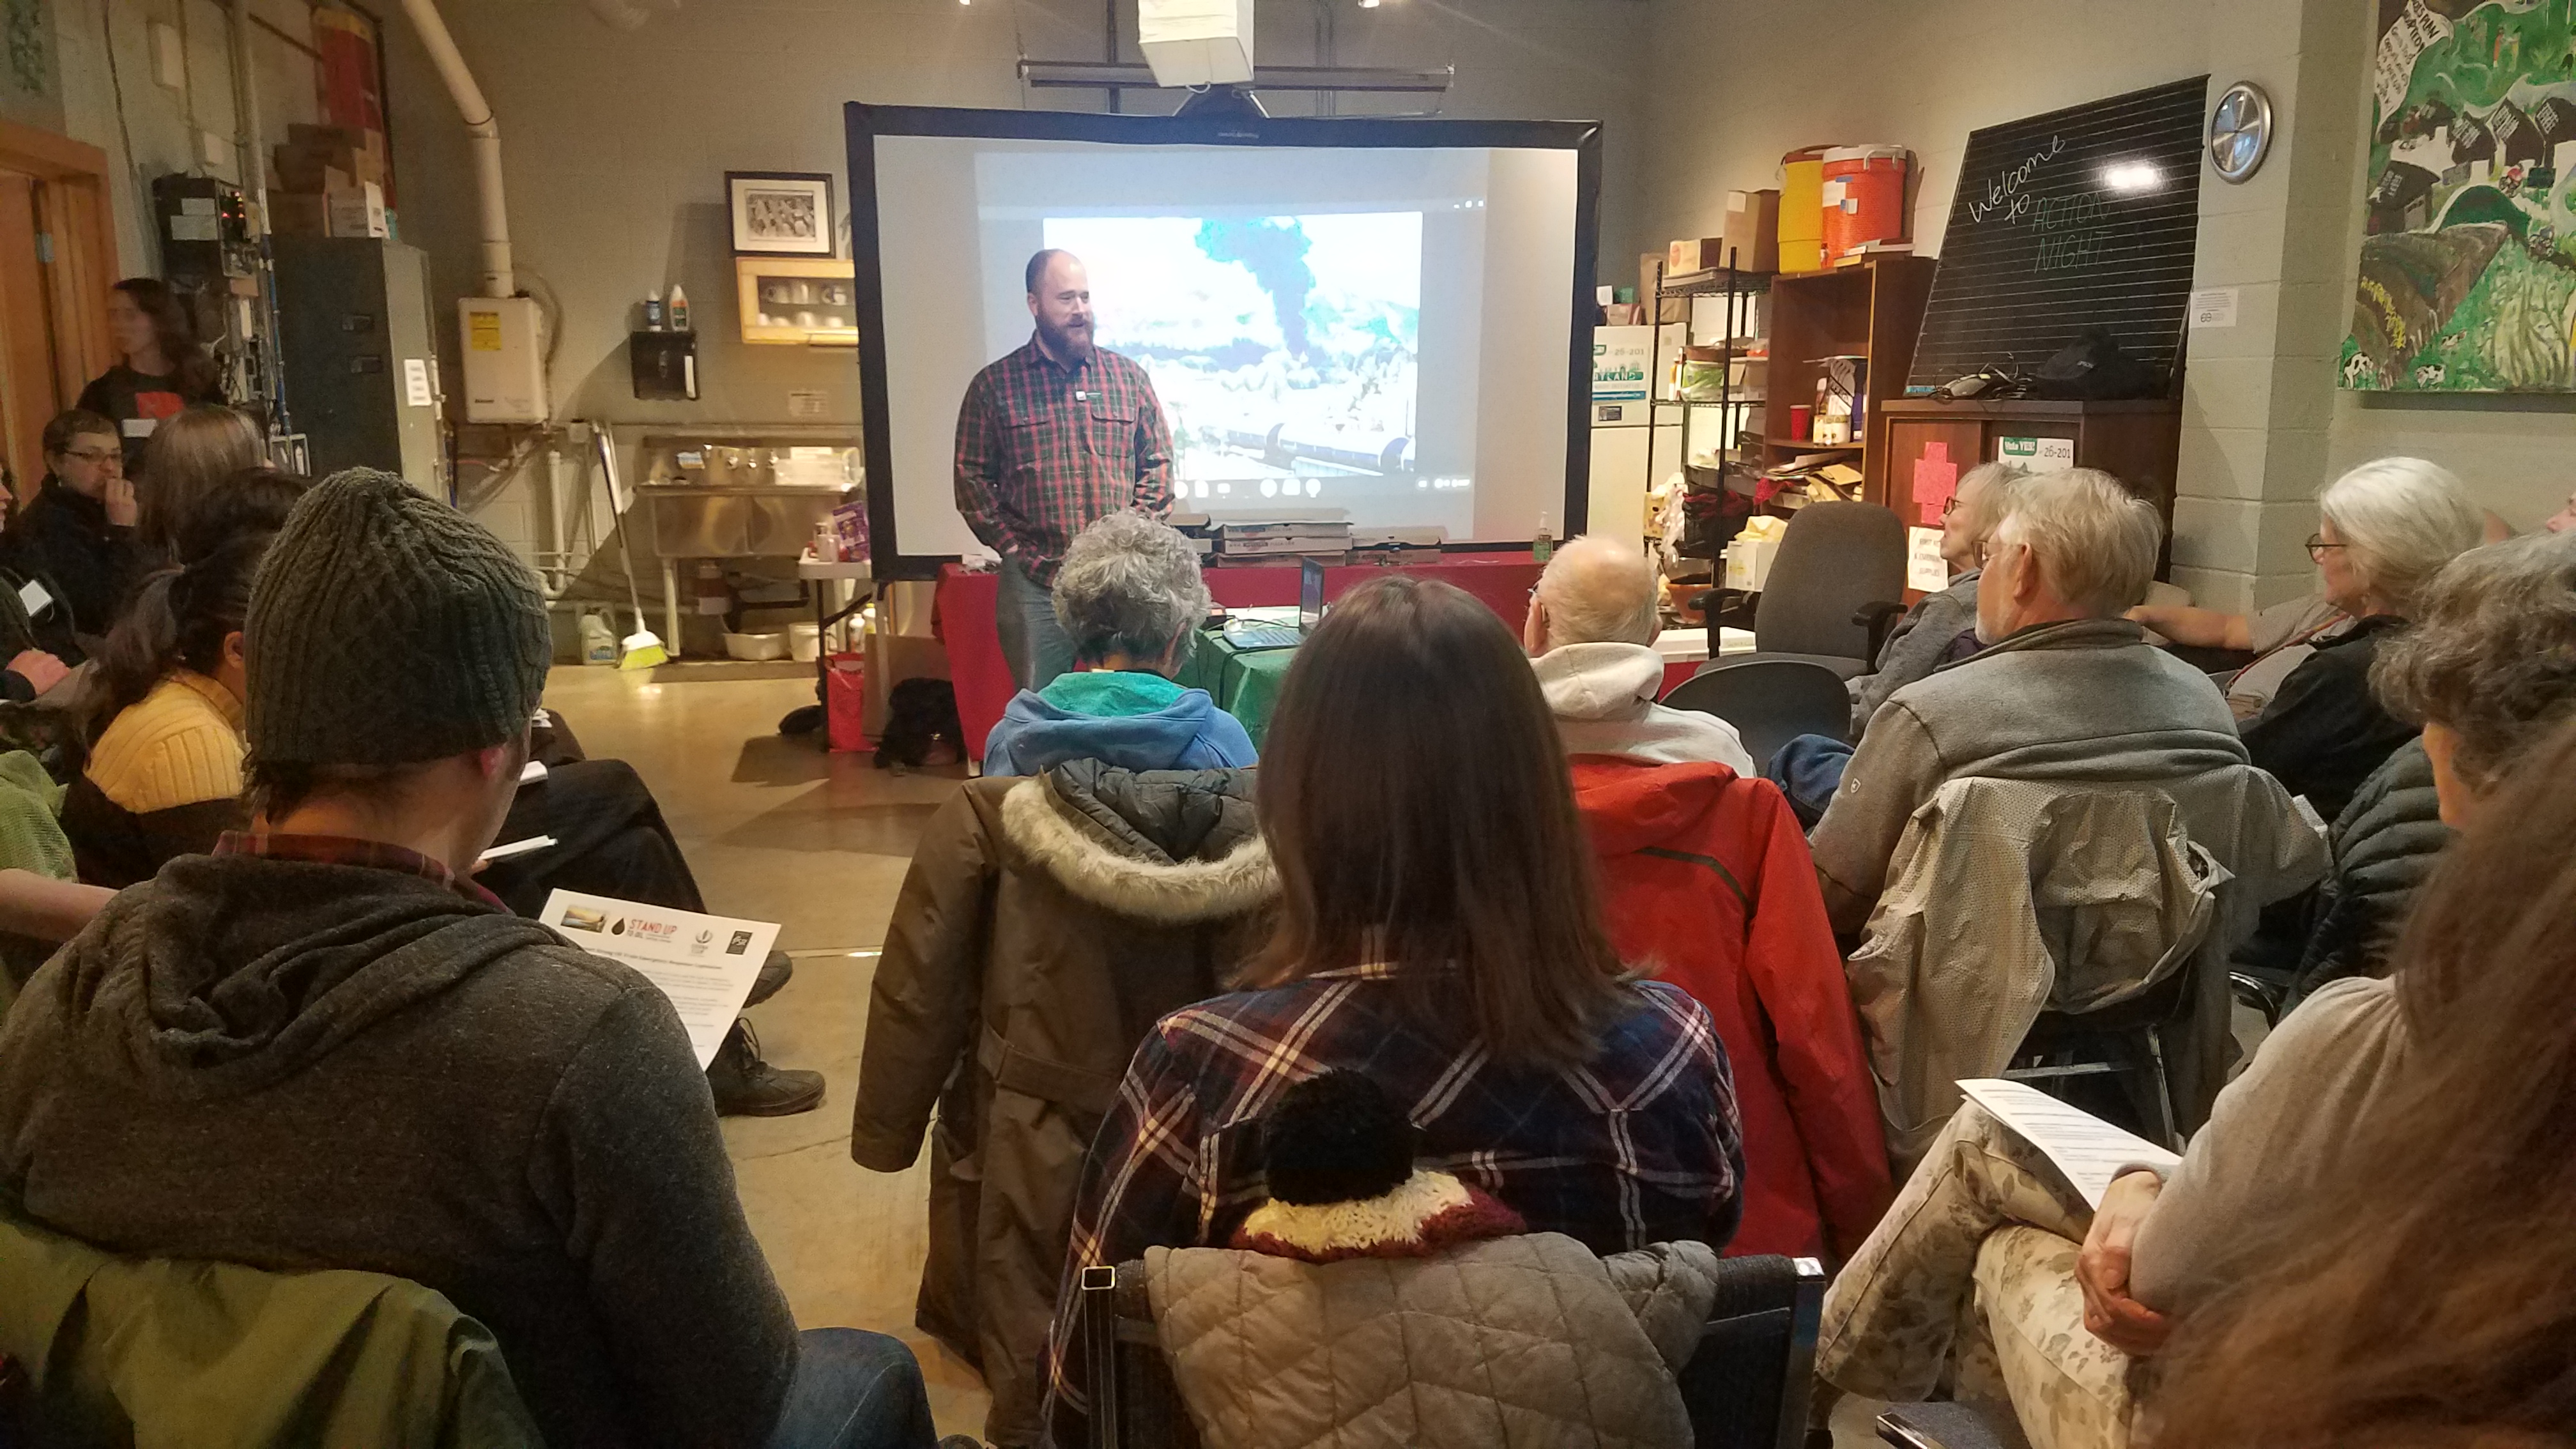 Ryan Riffenhouse answers questions about railroads in the Columbia Gorge. Feb 2019.